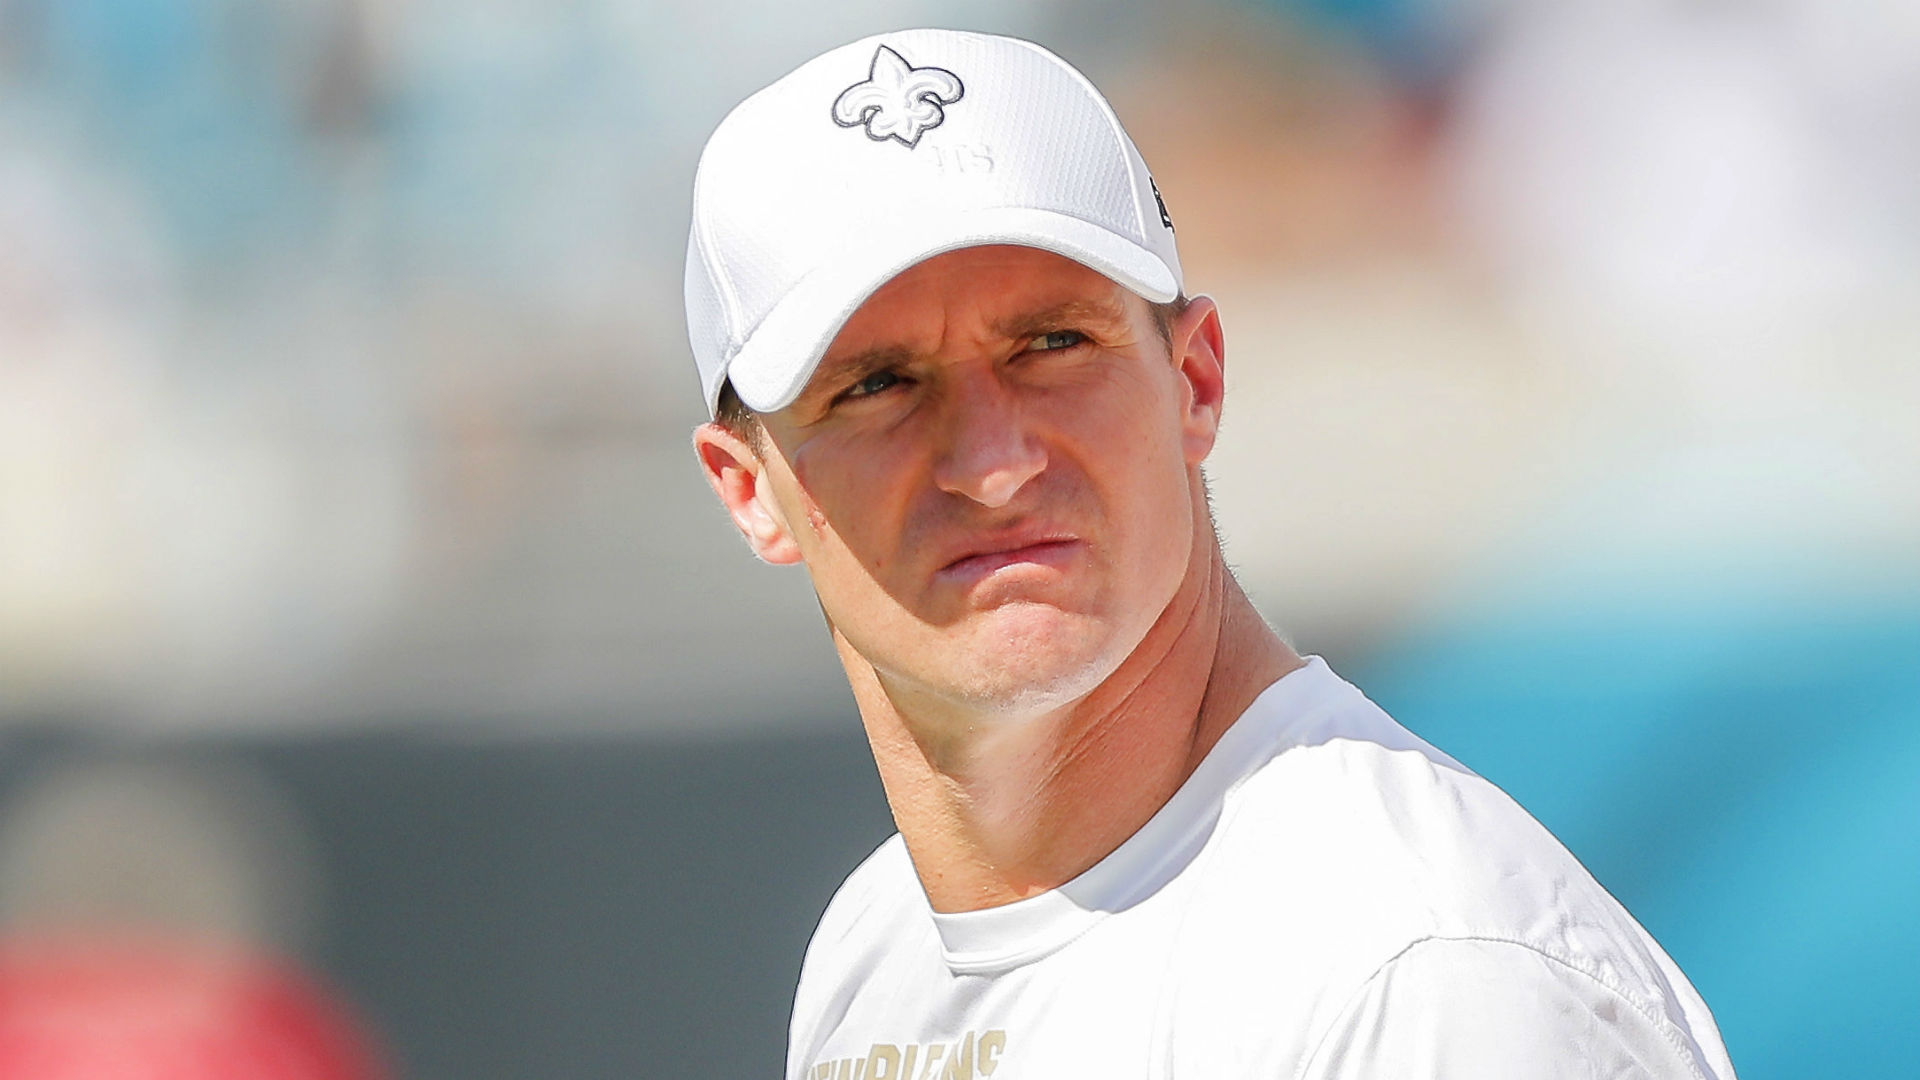 New Orleans Saints quarterback Drew Brees, 40, provided an update on his recovery from a thumb injury.